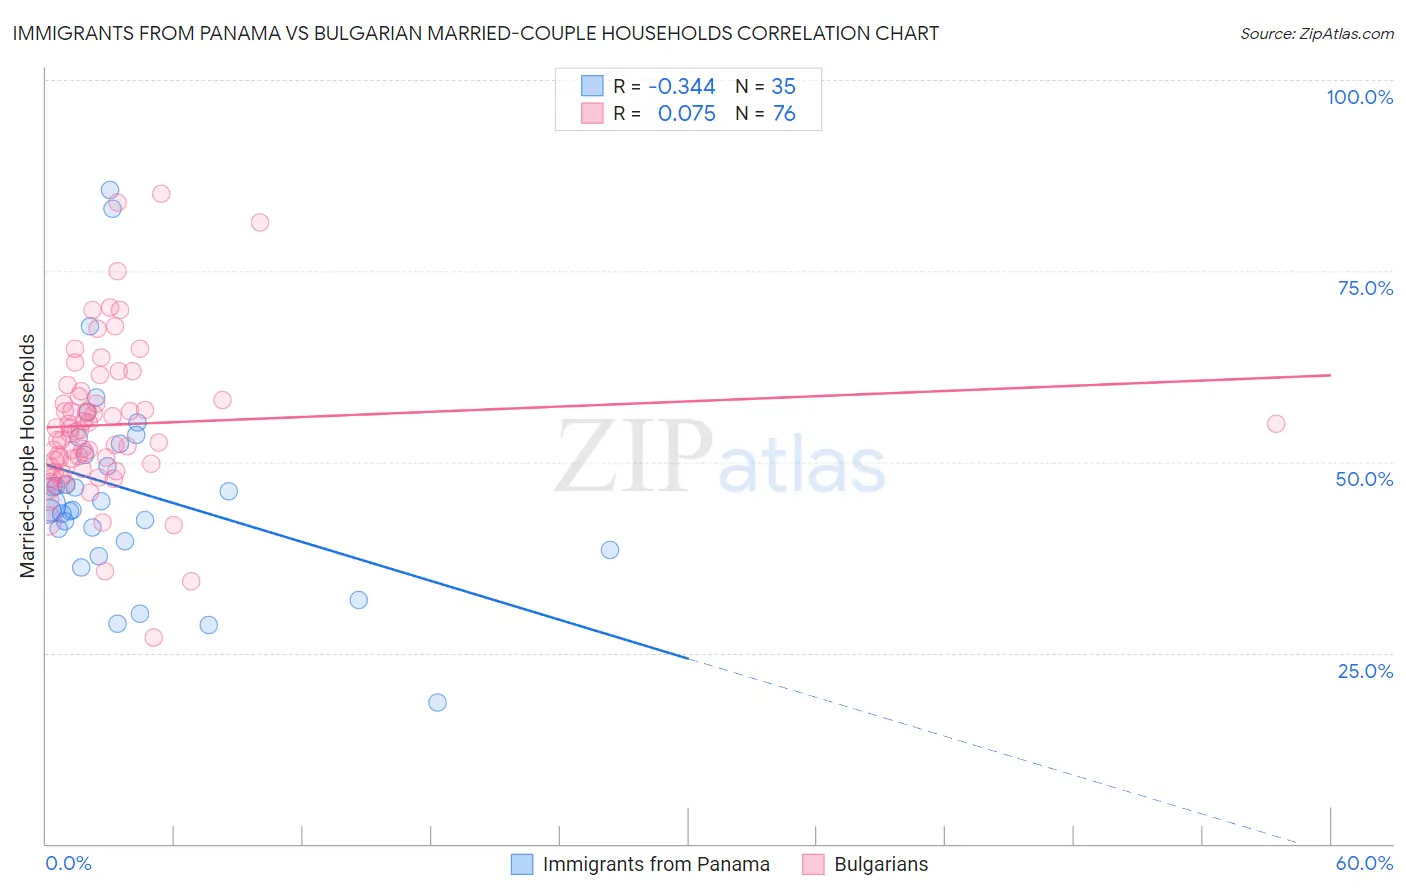 Immigrants from Panama vs Bulgarian Married-couple Households